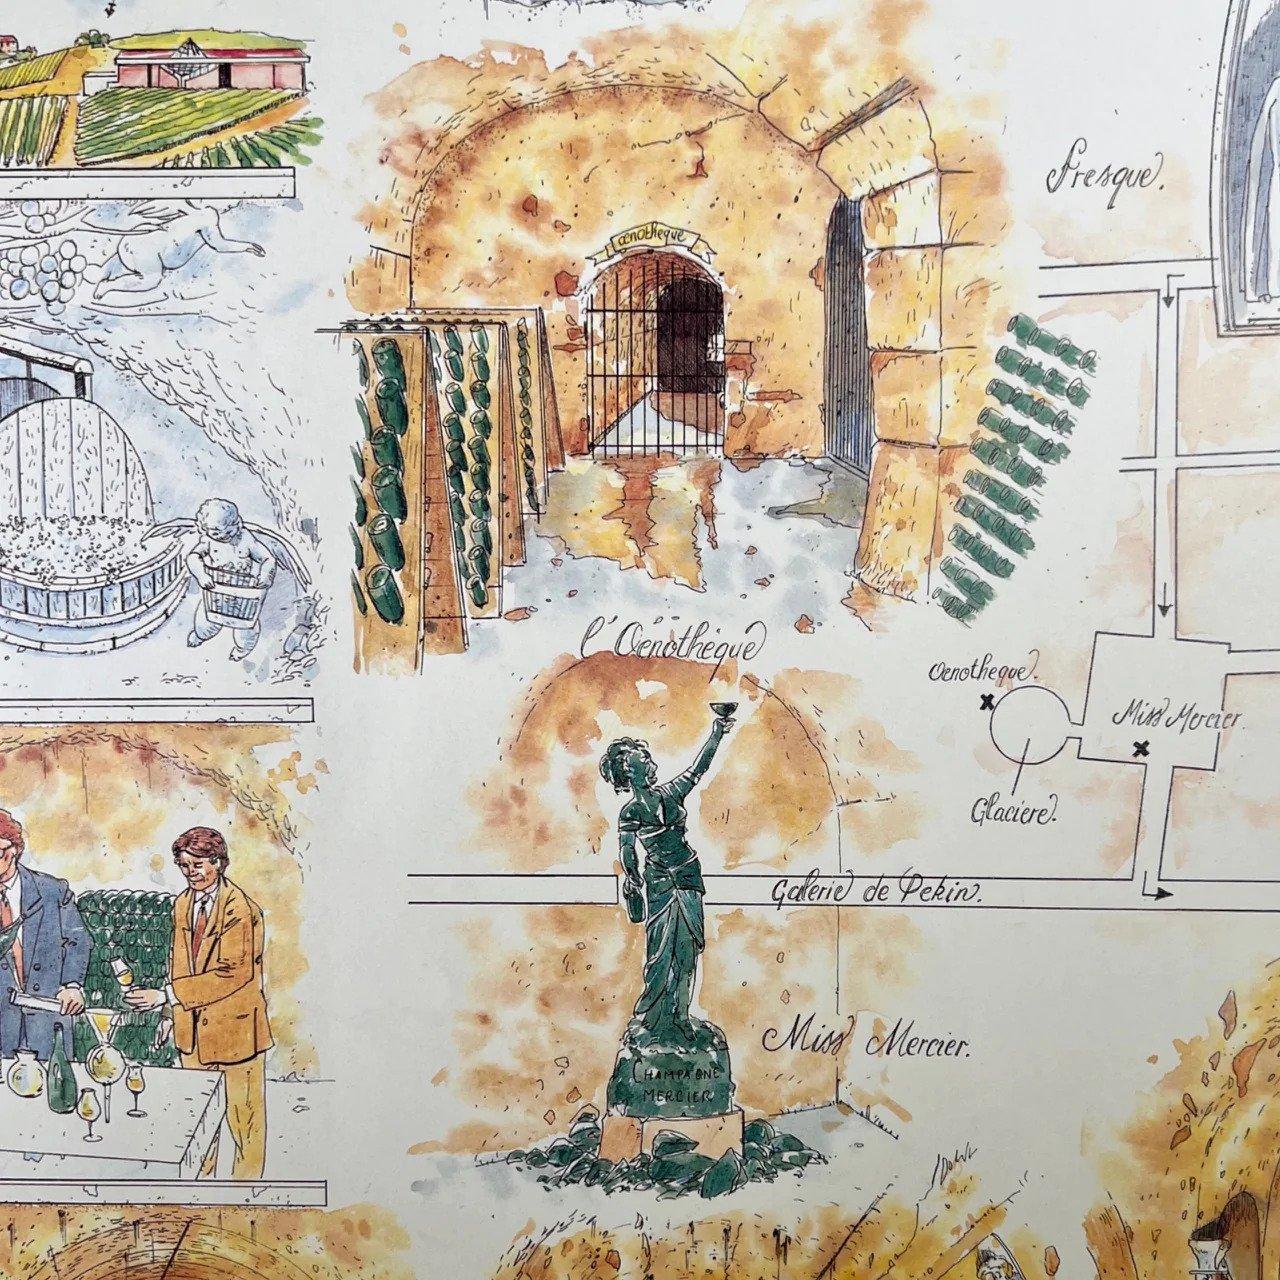 'La Formidable Histoire der Caves Mercier',  'The great story of Caves Mercier in Champagne'. A whimsical and truly Parisienne styled paper hand drawing, showcasing  the history of Mercier, in the Champagne region, in story book type fine drawings.